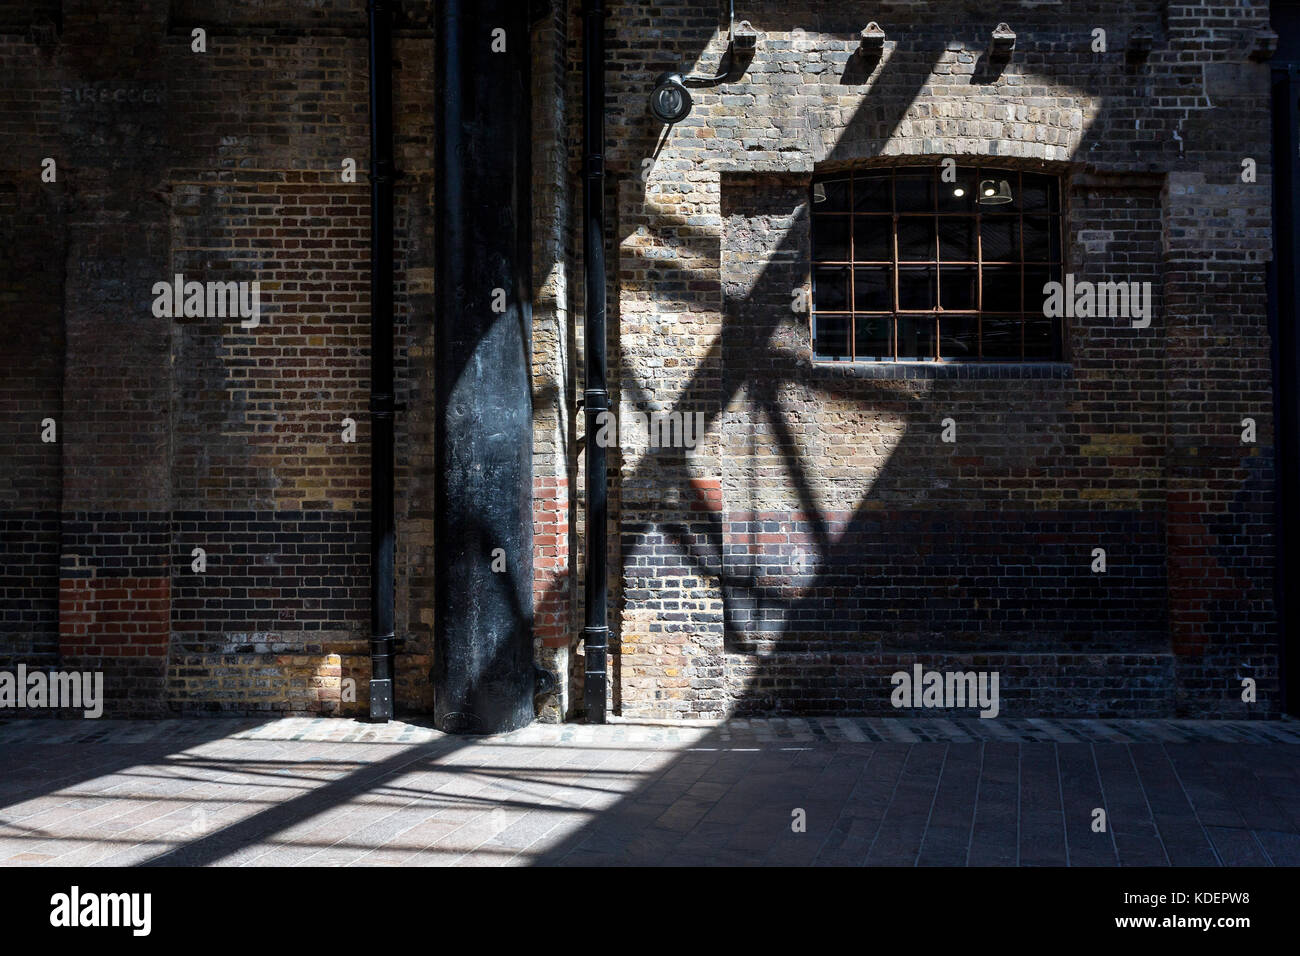 Westside Canopy by Midland Goods Shed, King's Cross, London, UK Stock Photo